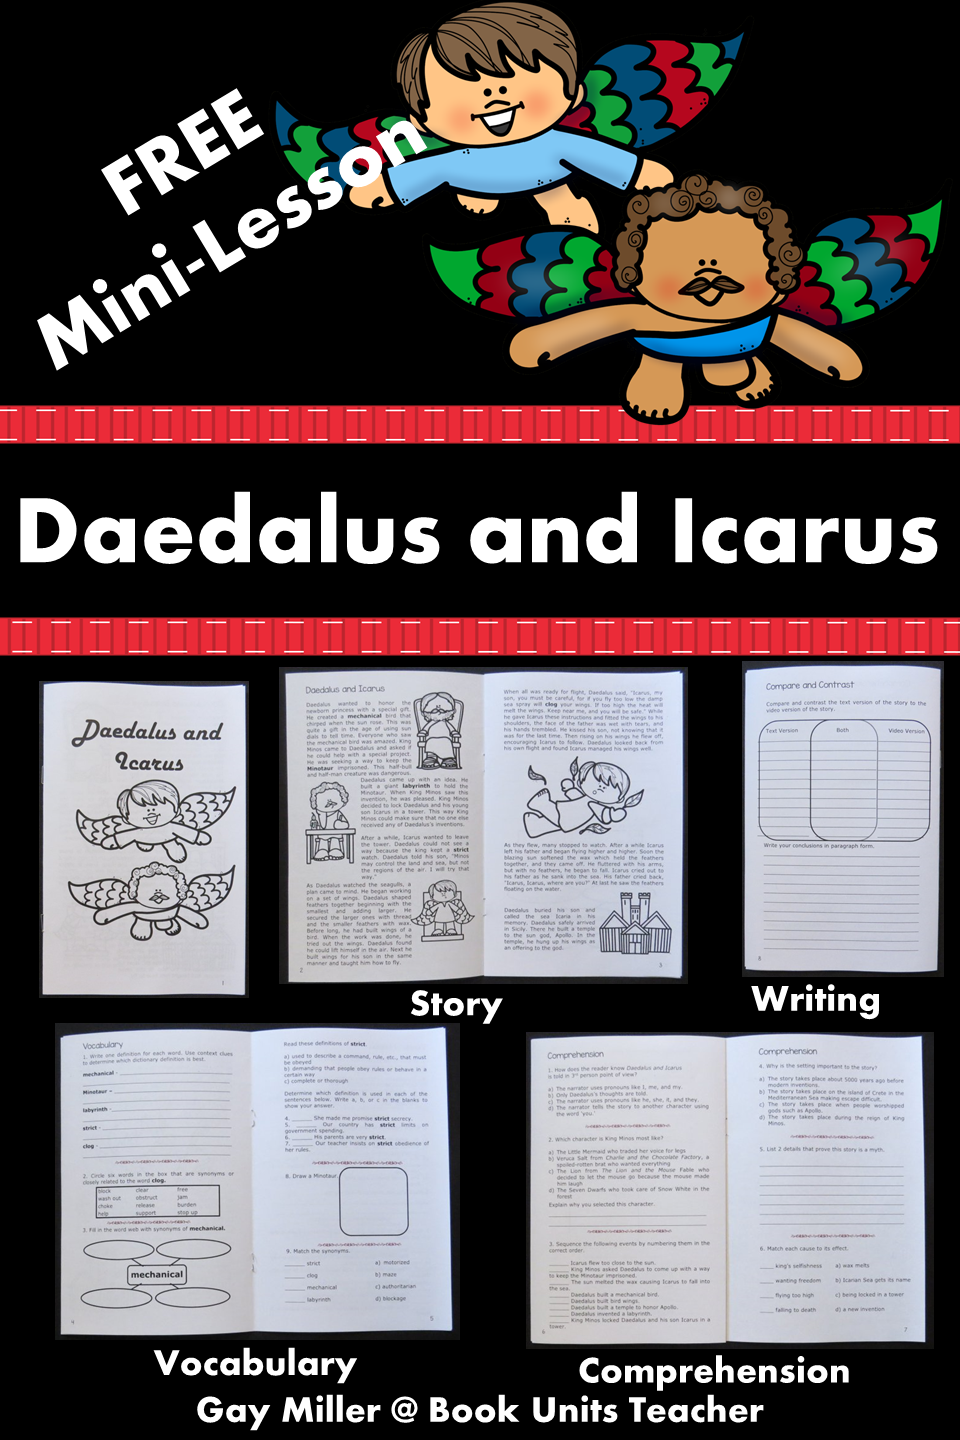 Free Mini-Lesson for Daedalus and Icarus